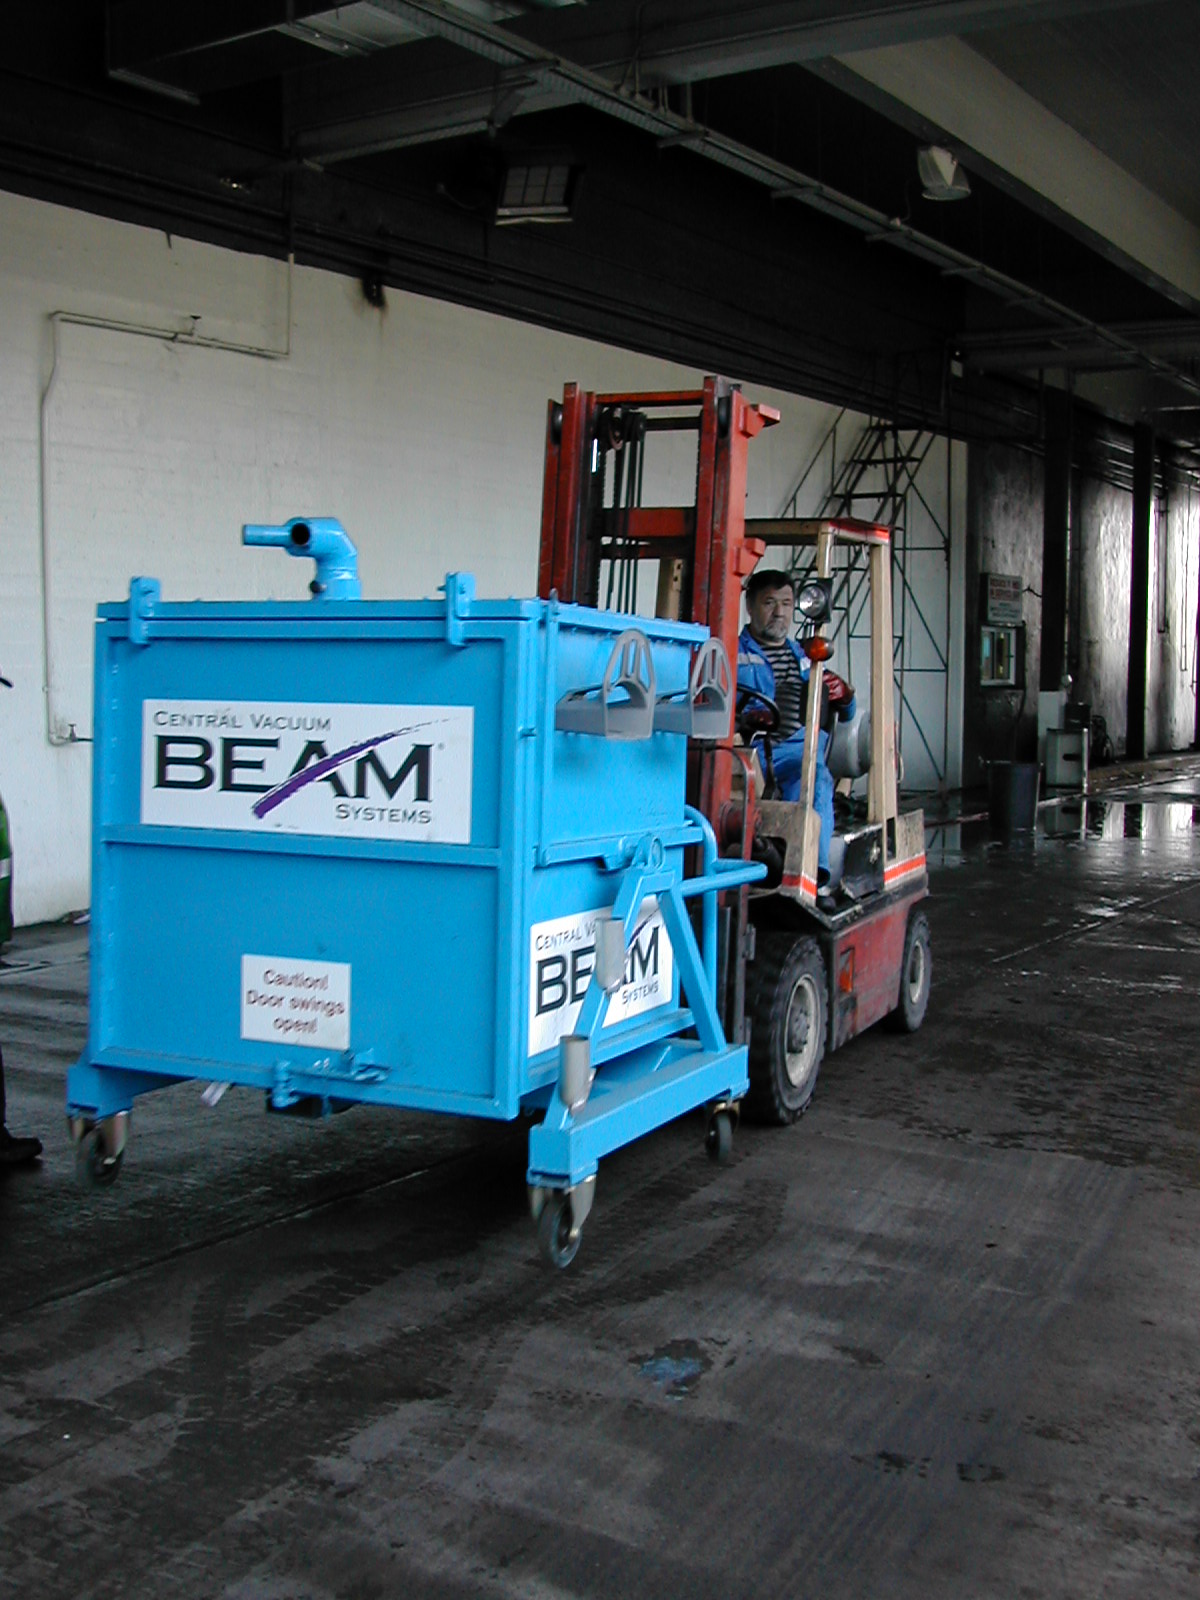 Beam Commercial Vacuum bulk separator being lifted by forklift